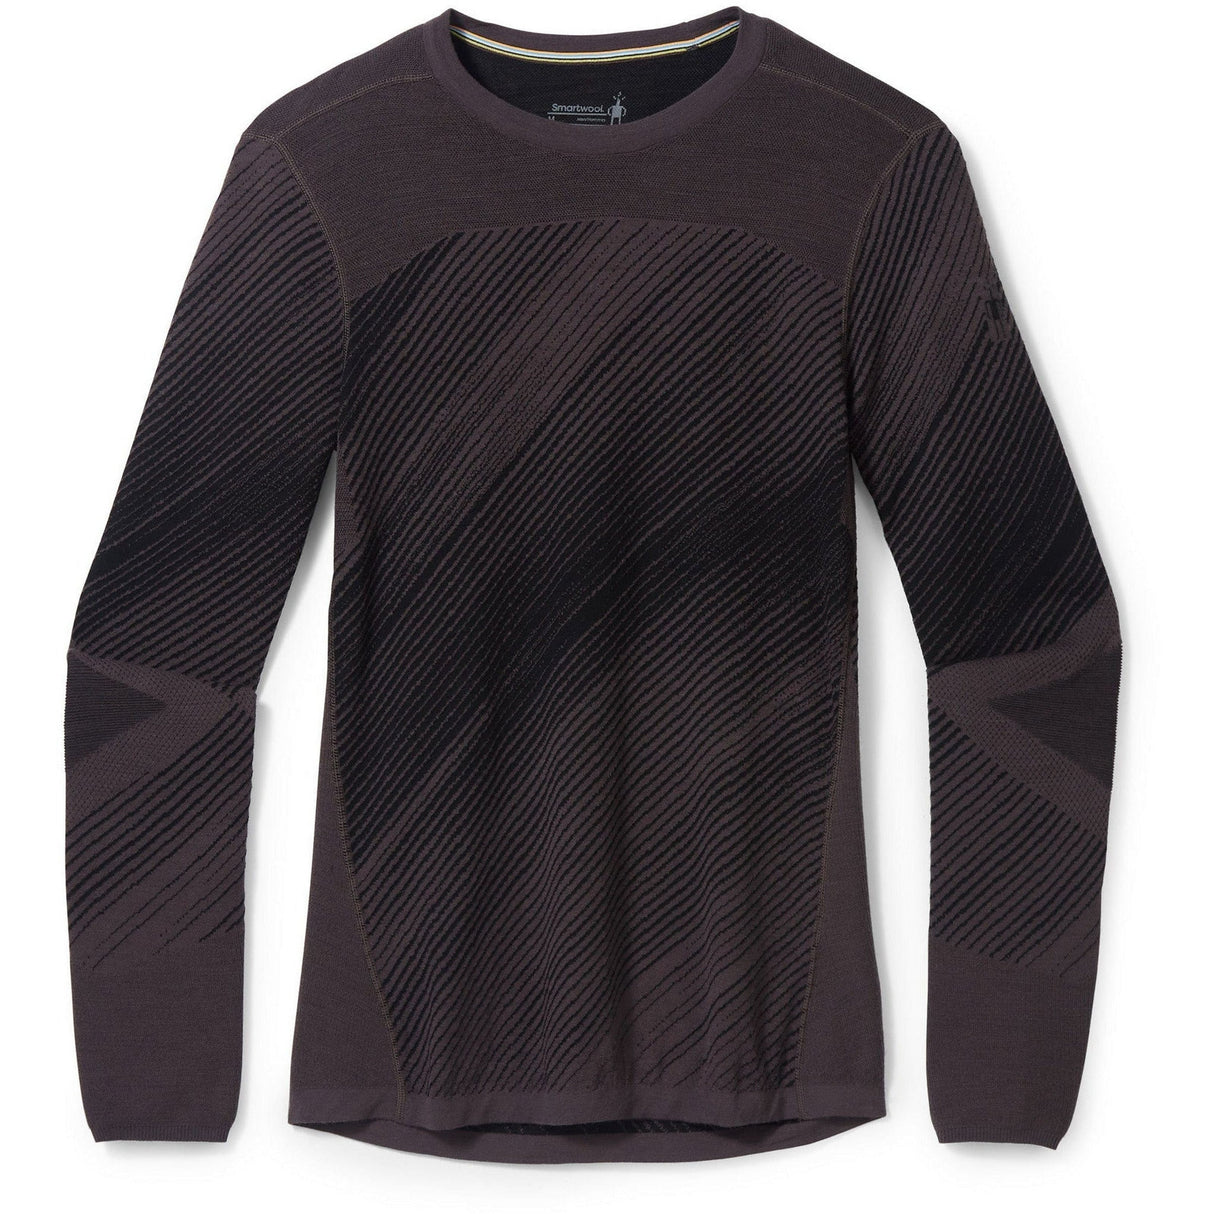 Smartwool Mens Intraknit Thermal Merino Base Layer Pattern Crew  -  Large / Shale Angled